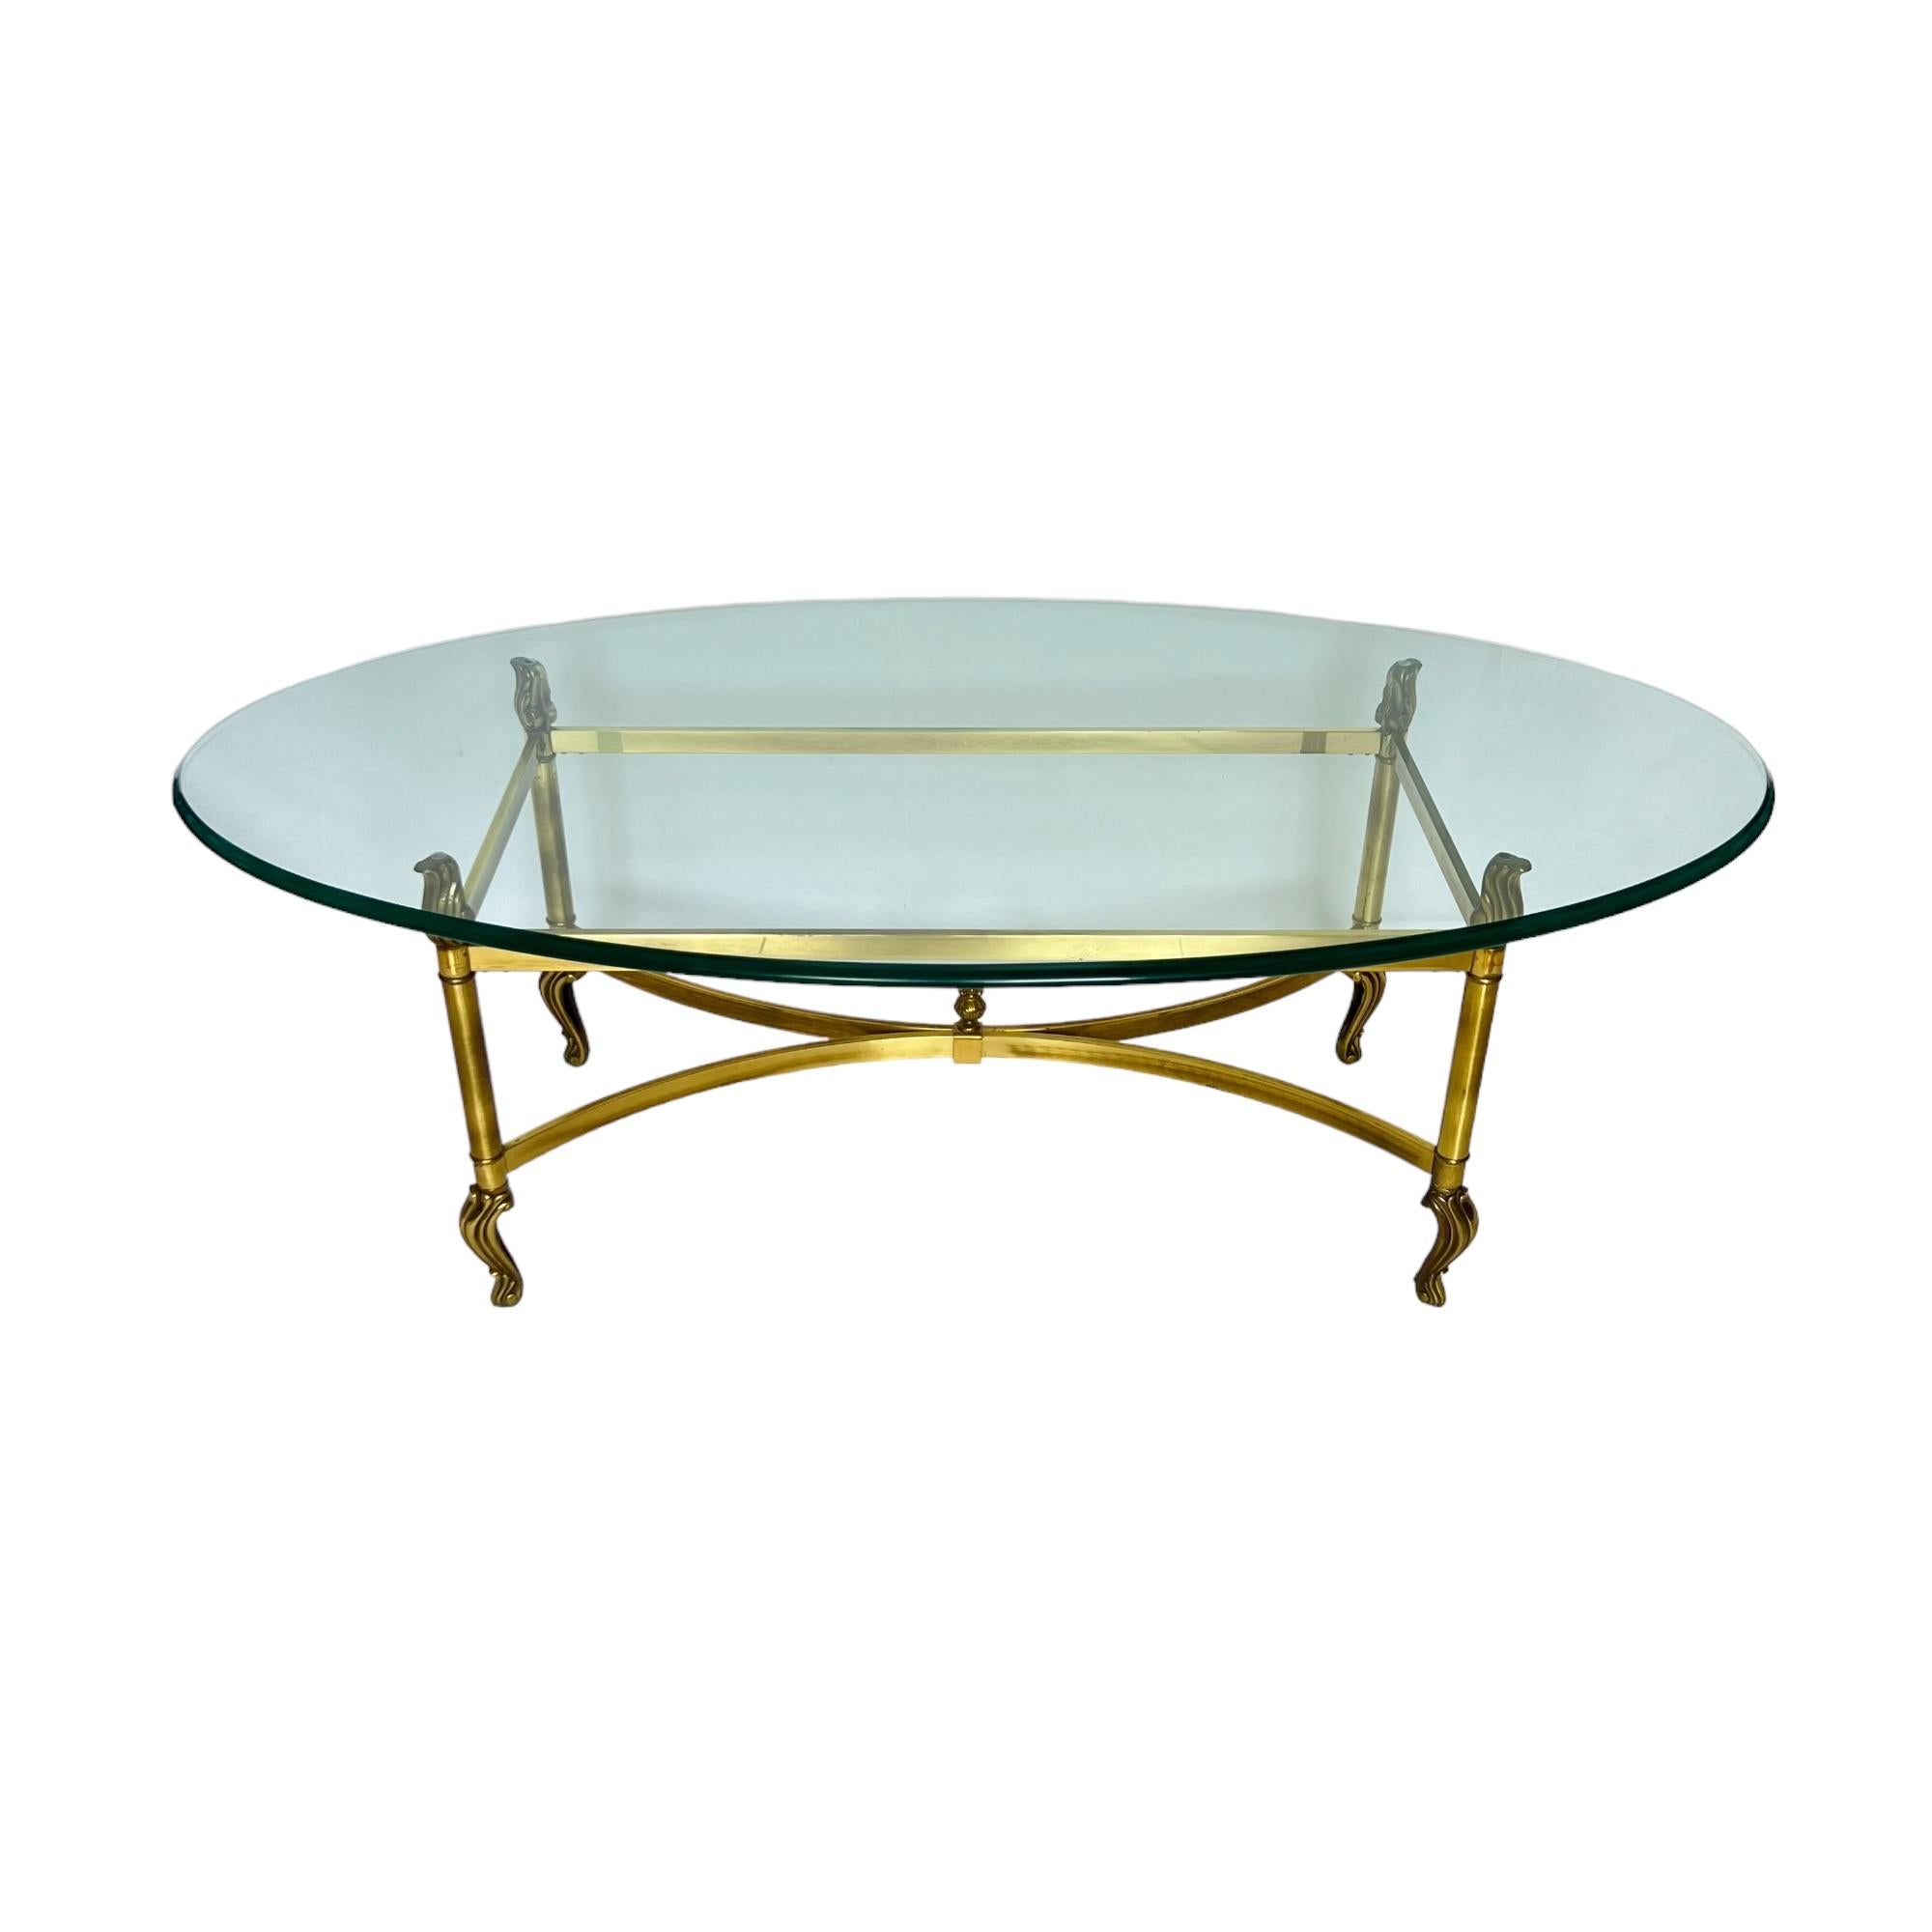 Hollywood Regency Neoclassical Brass Oval Glass Top Coffee Table, Late 20th C.